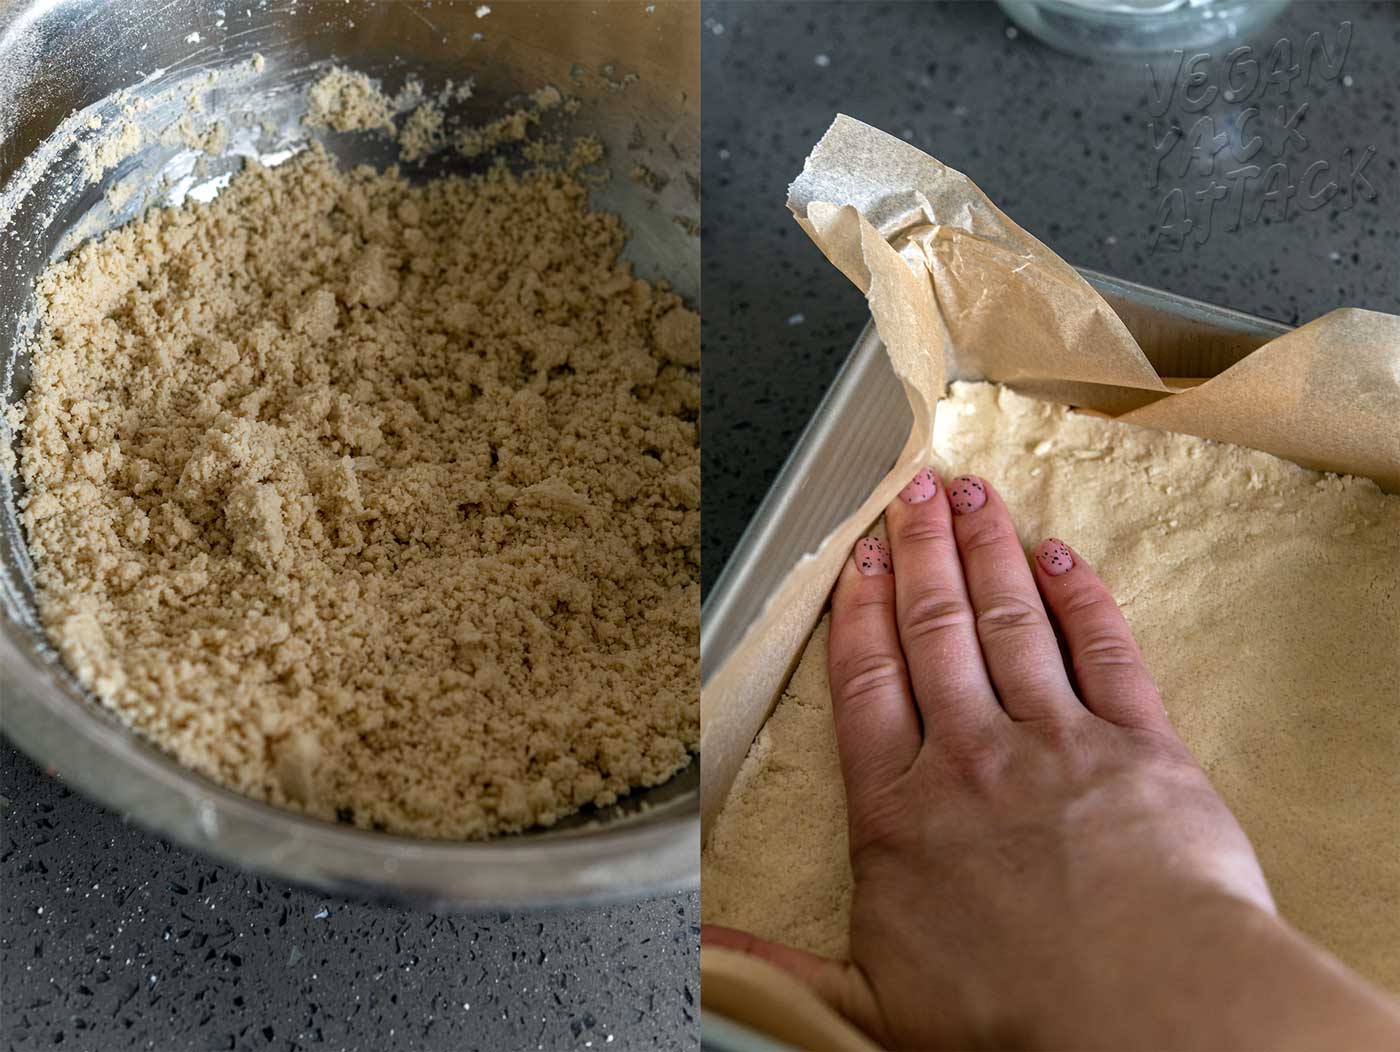 Image collage of crumbly shortbread dough and hand pressing it into a baking pan